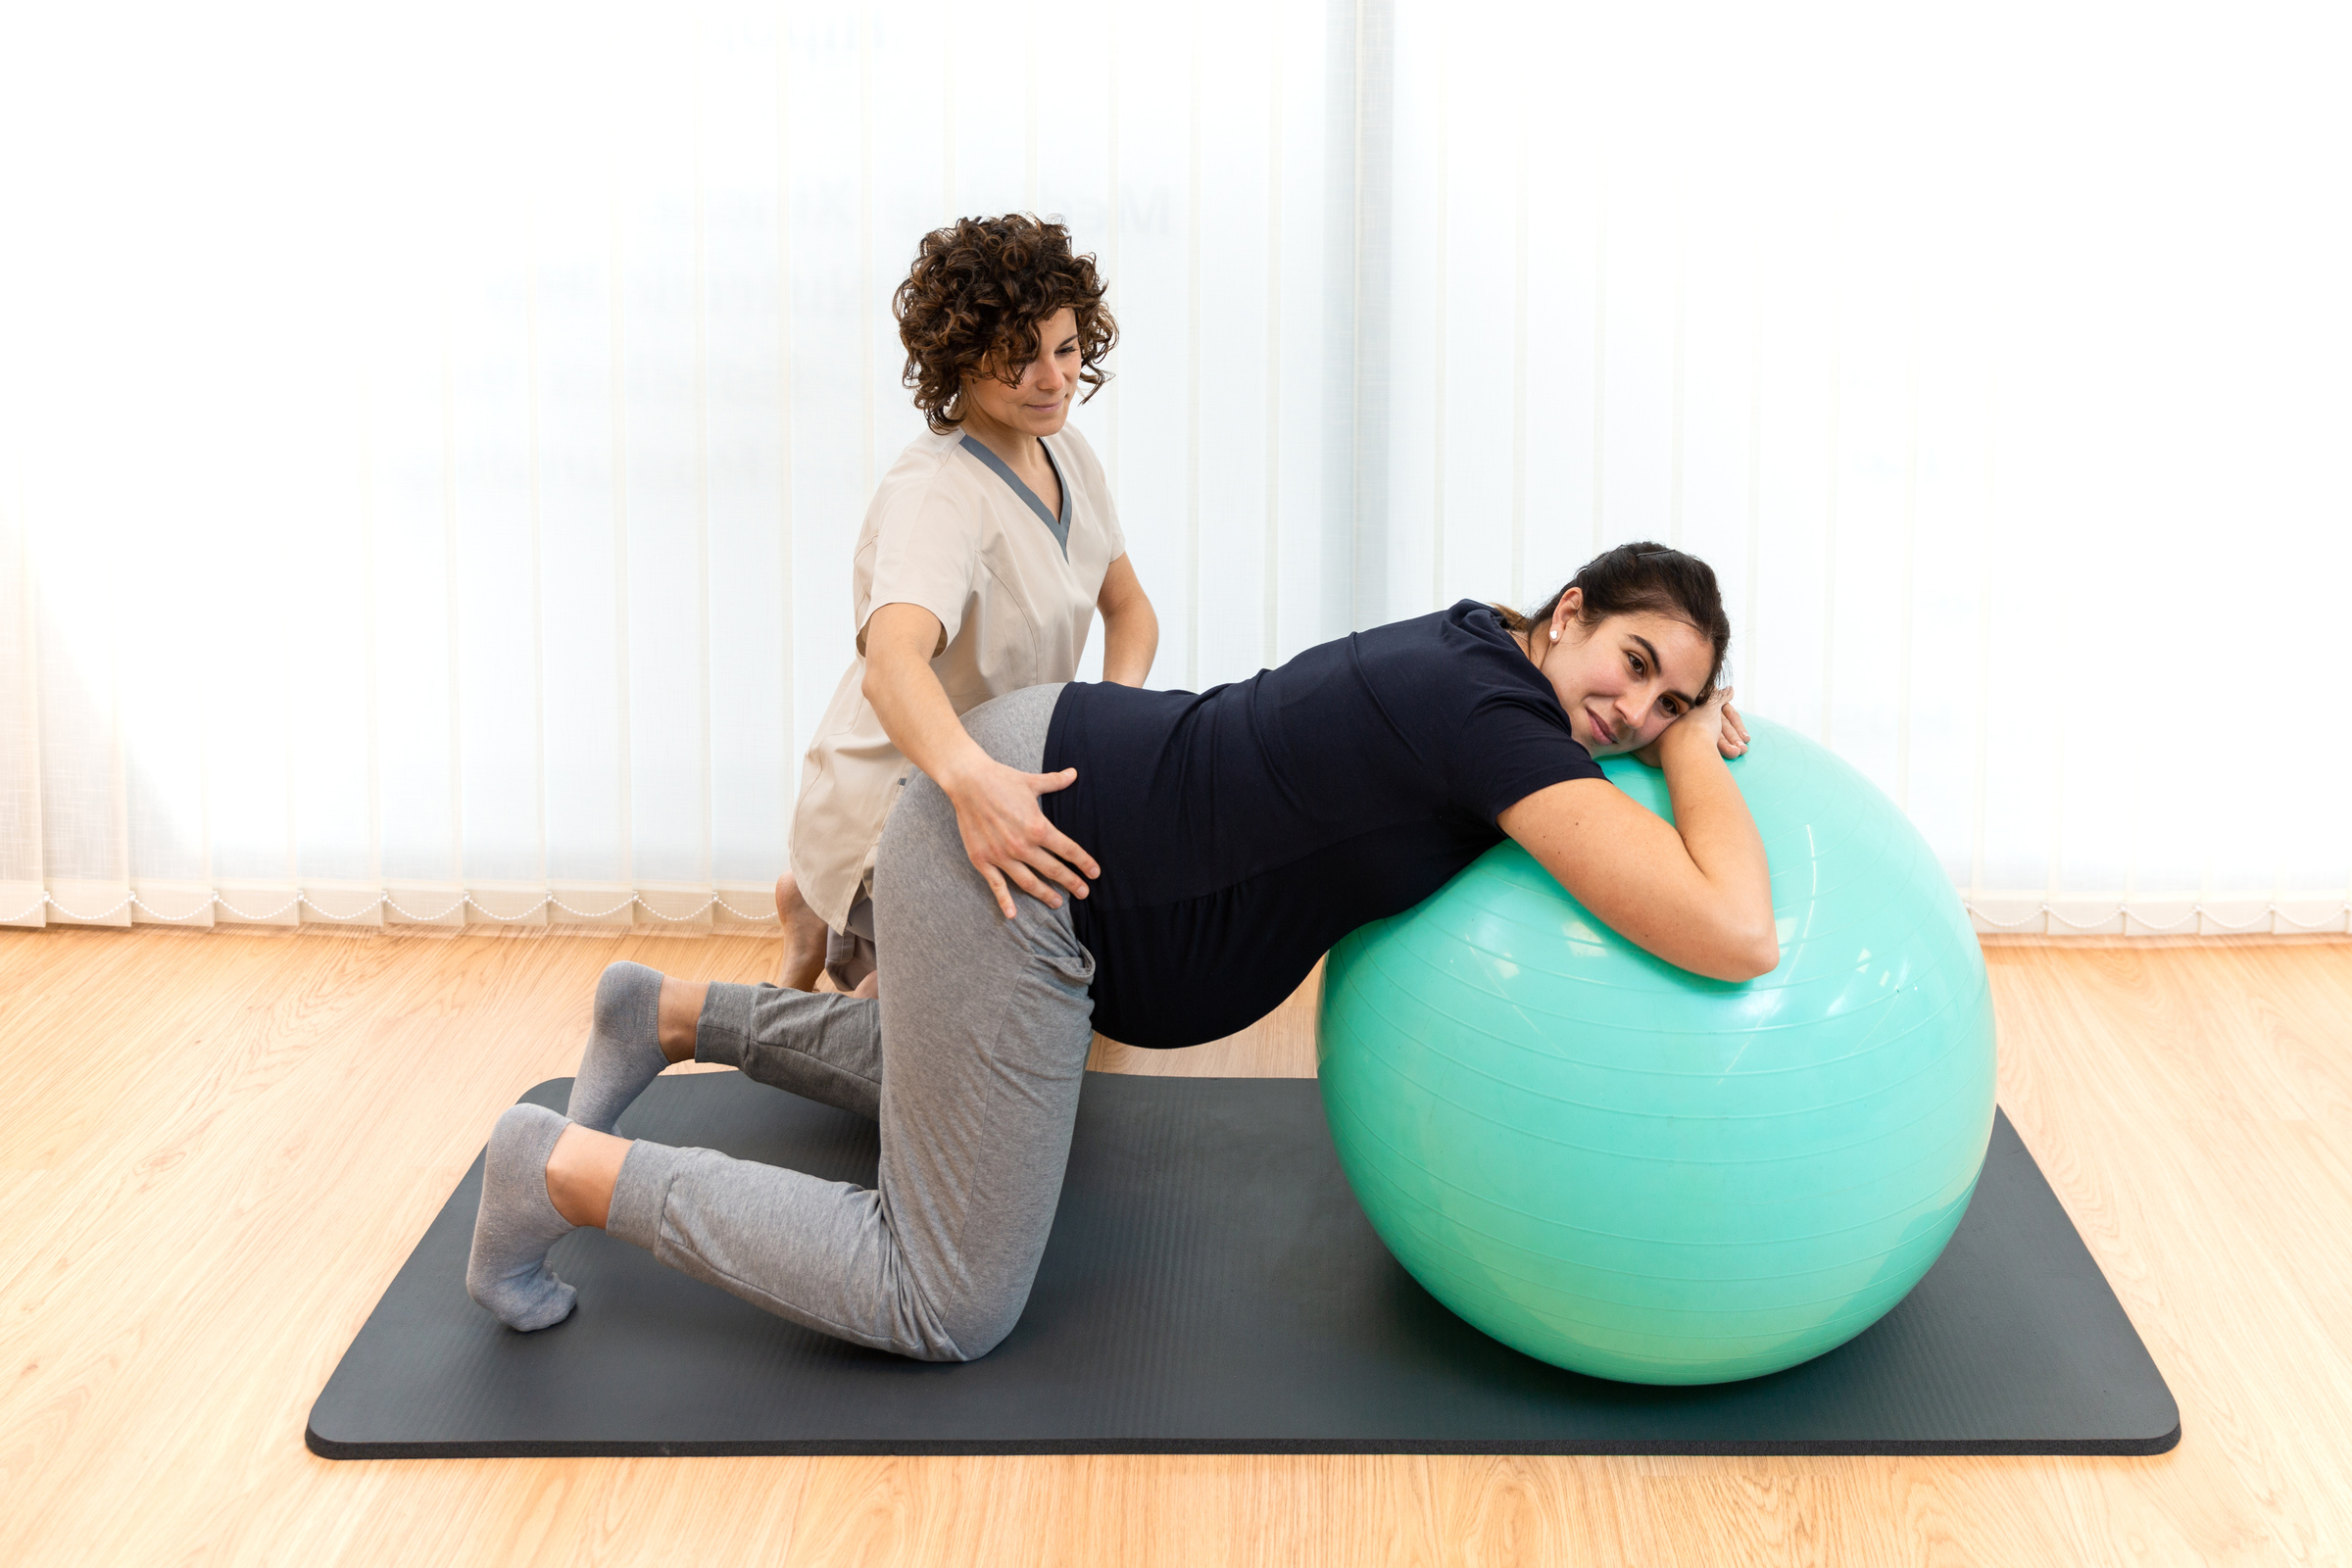 Pelvic Floor Physical Therapists in King of Prussia, Pa - Pelvic